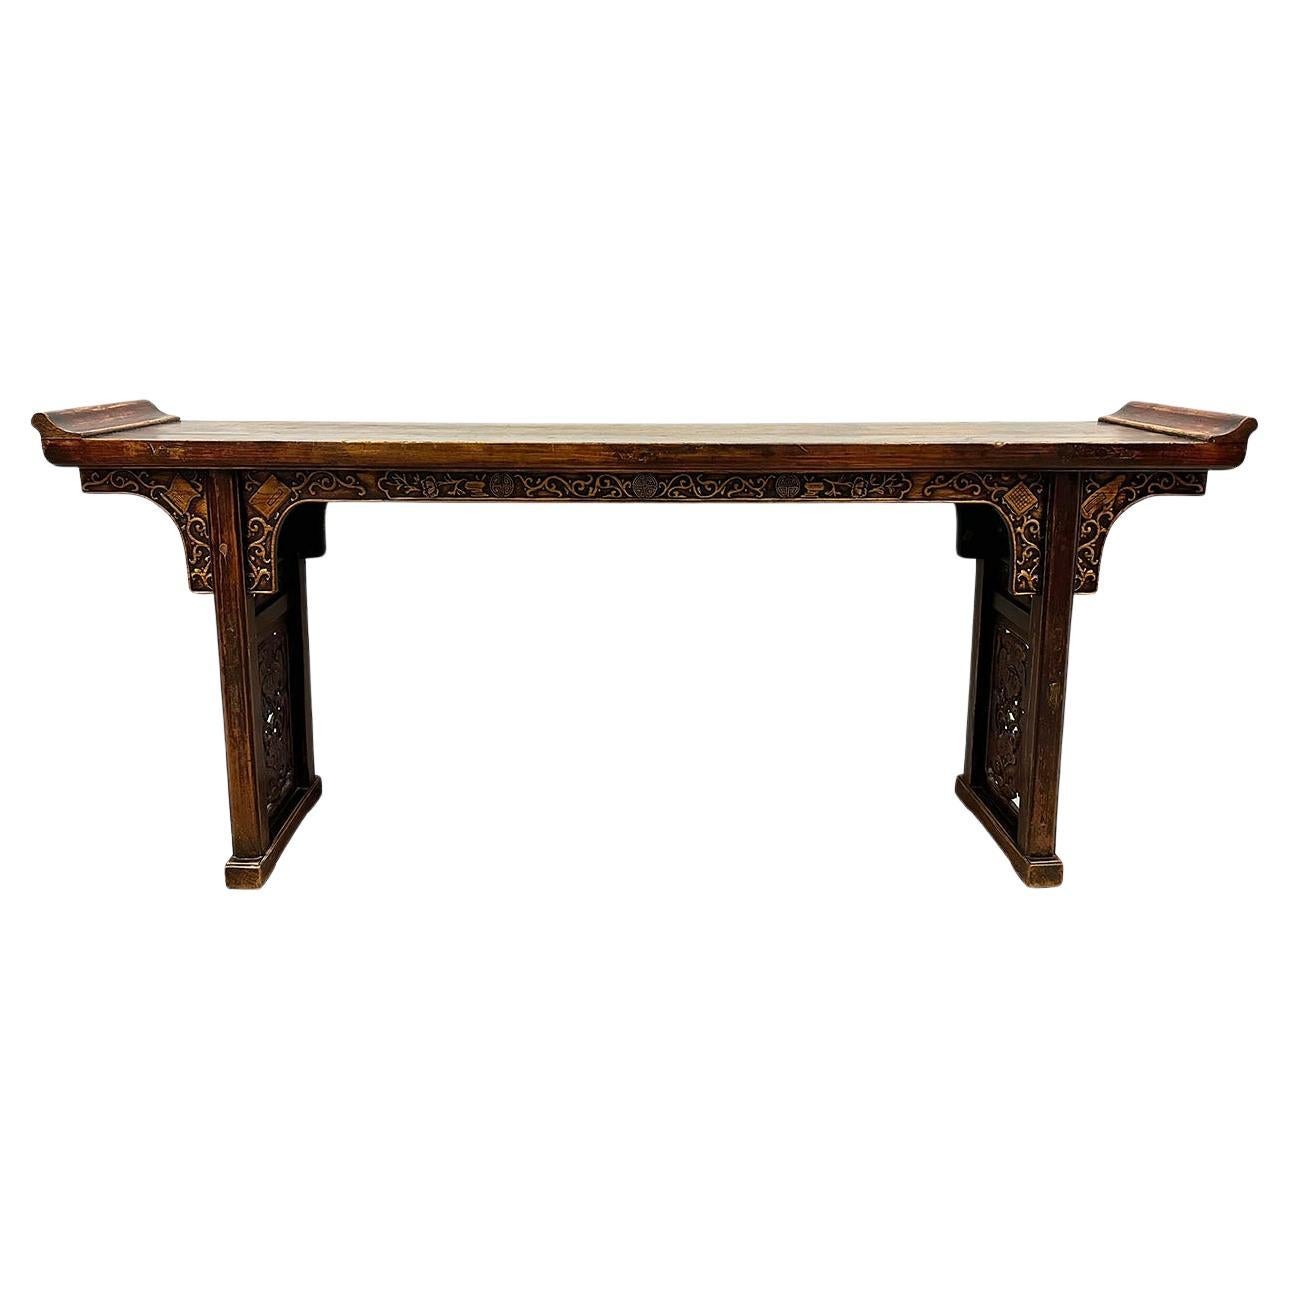  19th Century Antique Chinese Carved Altar Table/Sofa Table/Console More Views For Sale